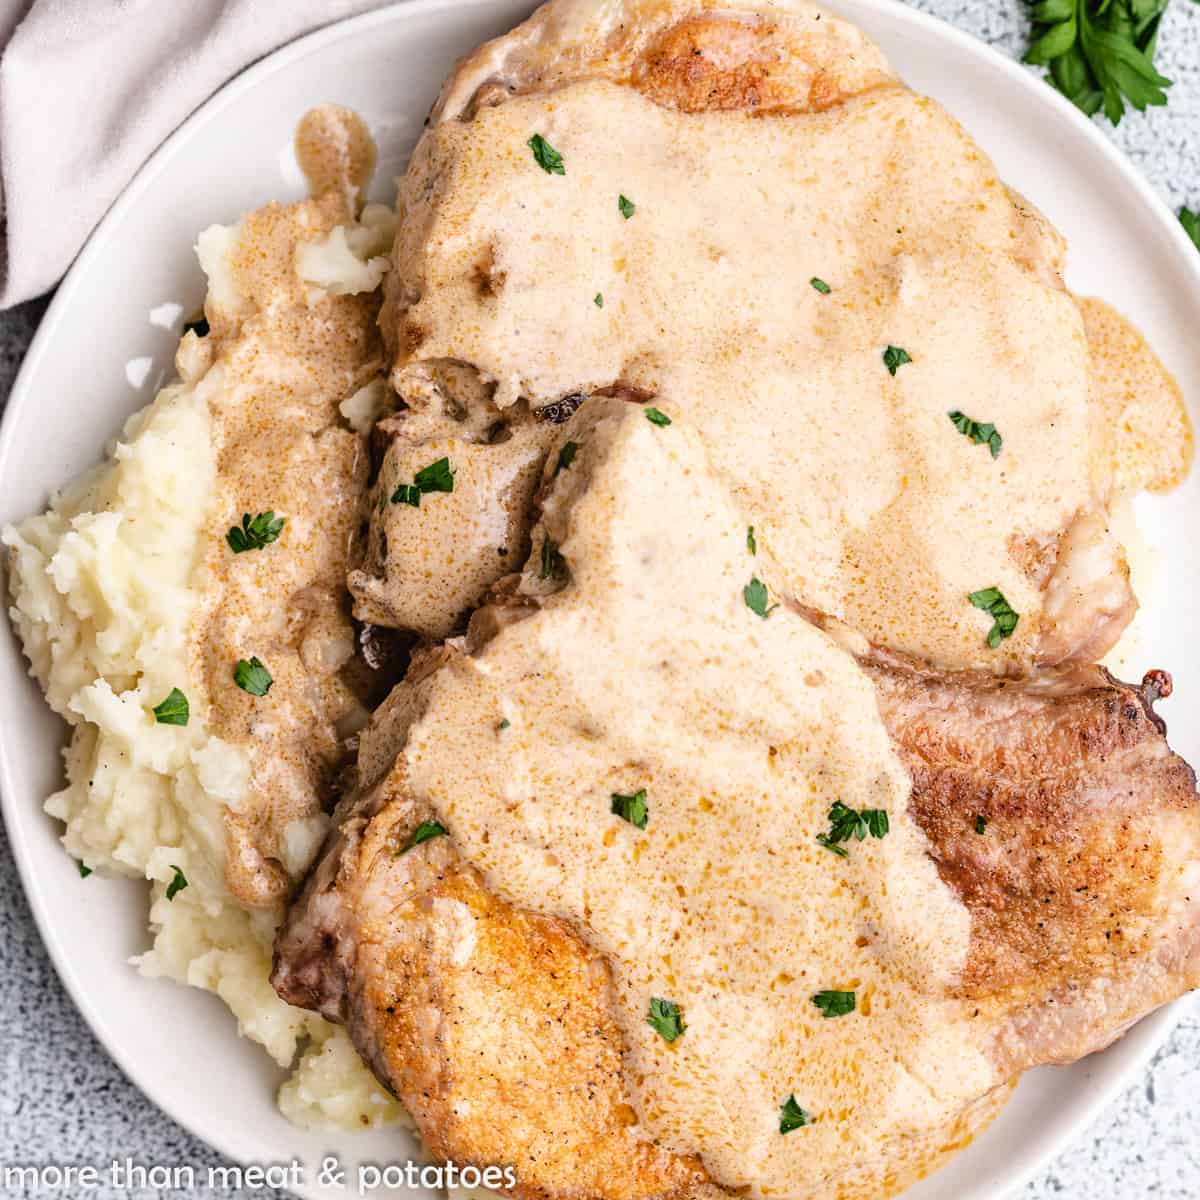 An aerial view of the sour cream pork chops with gravy.